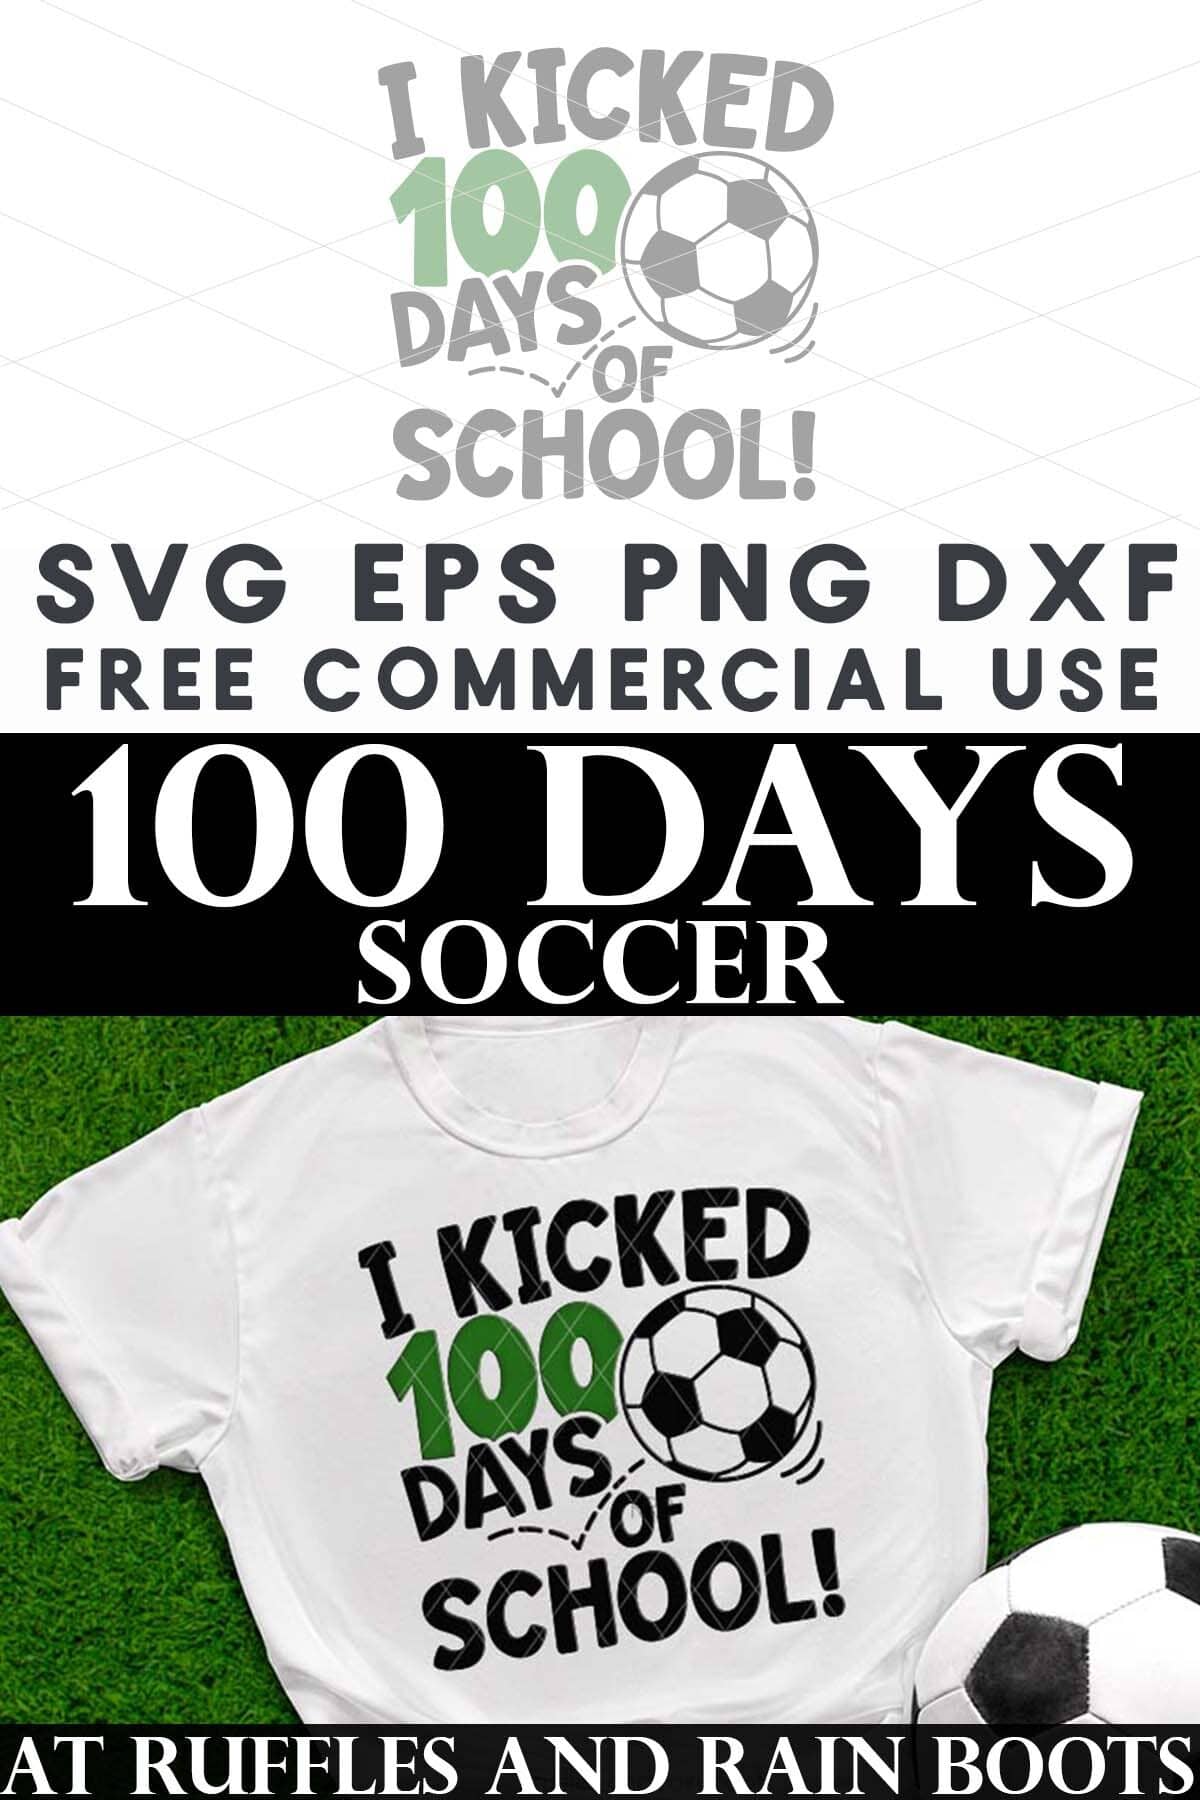 Vertical image of a soccer cut file for Cricut on top with a white t-shirt I kicked 100 days of school with soccer ball SVG.